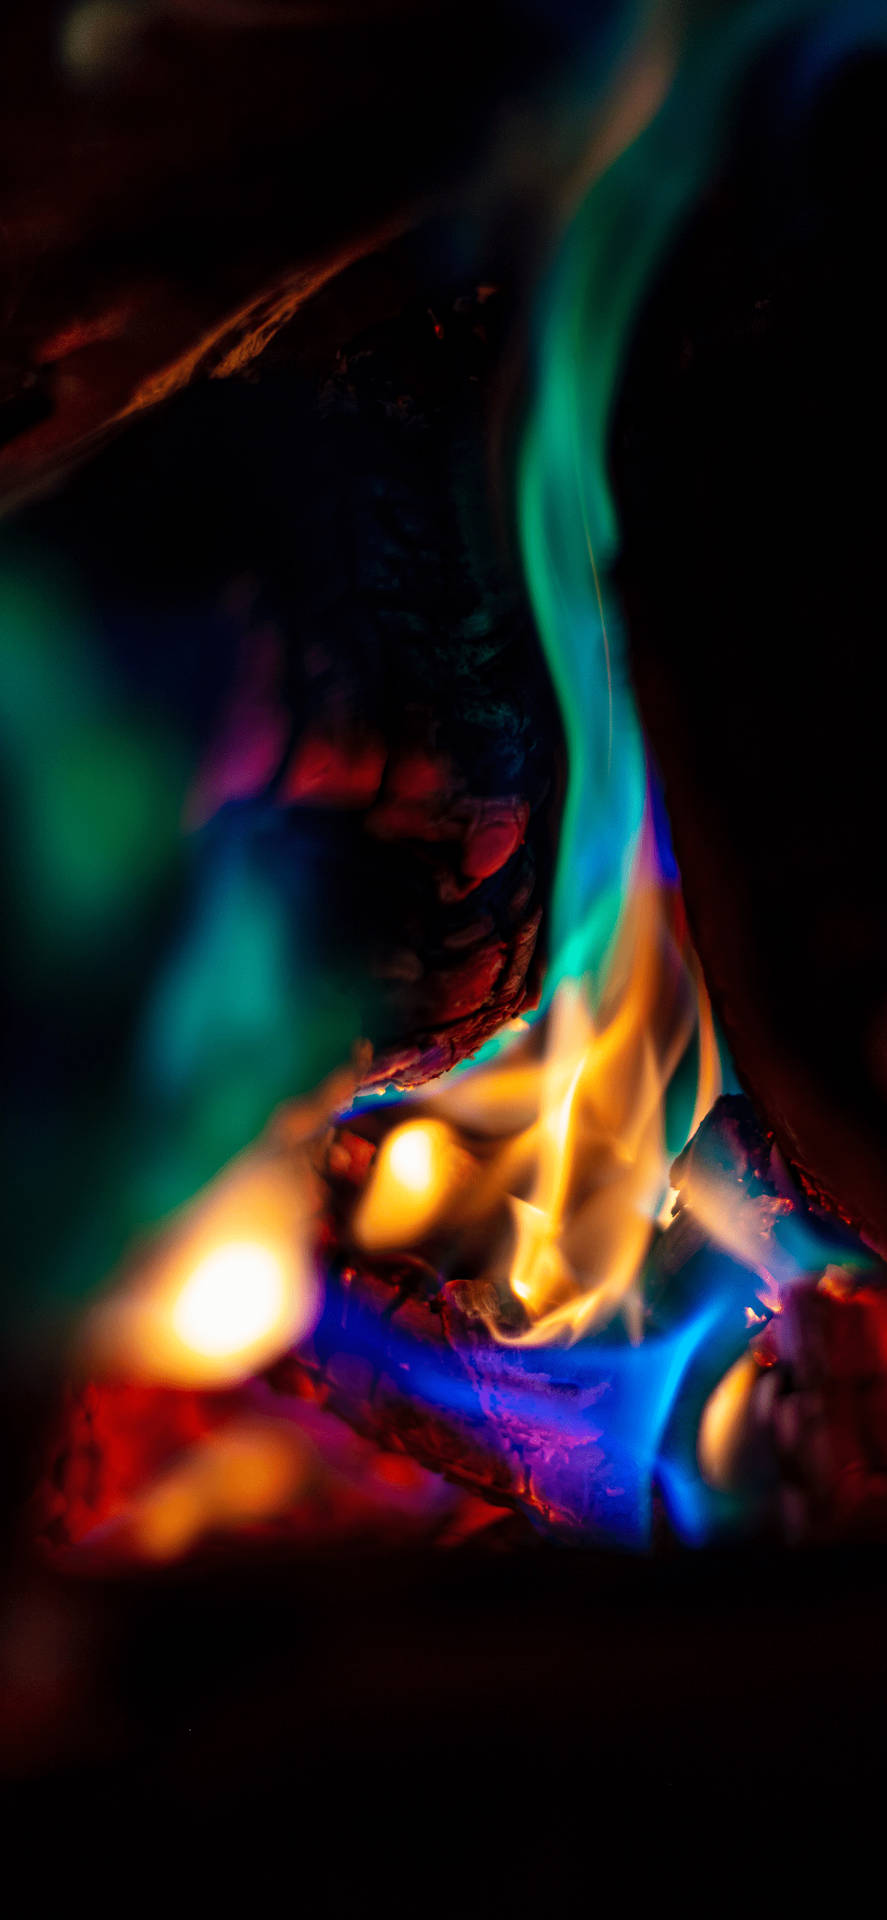 Iphone Fire Blue And Green Flame Wallpaper